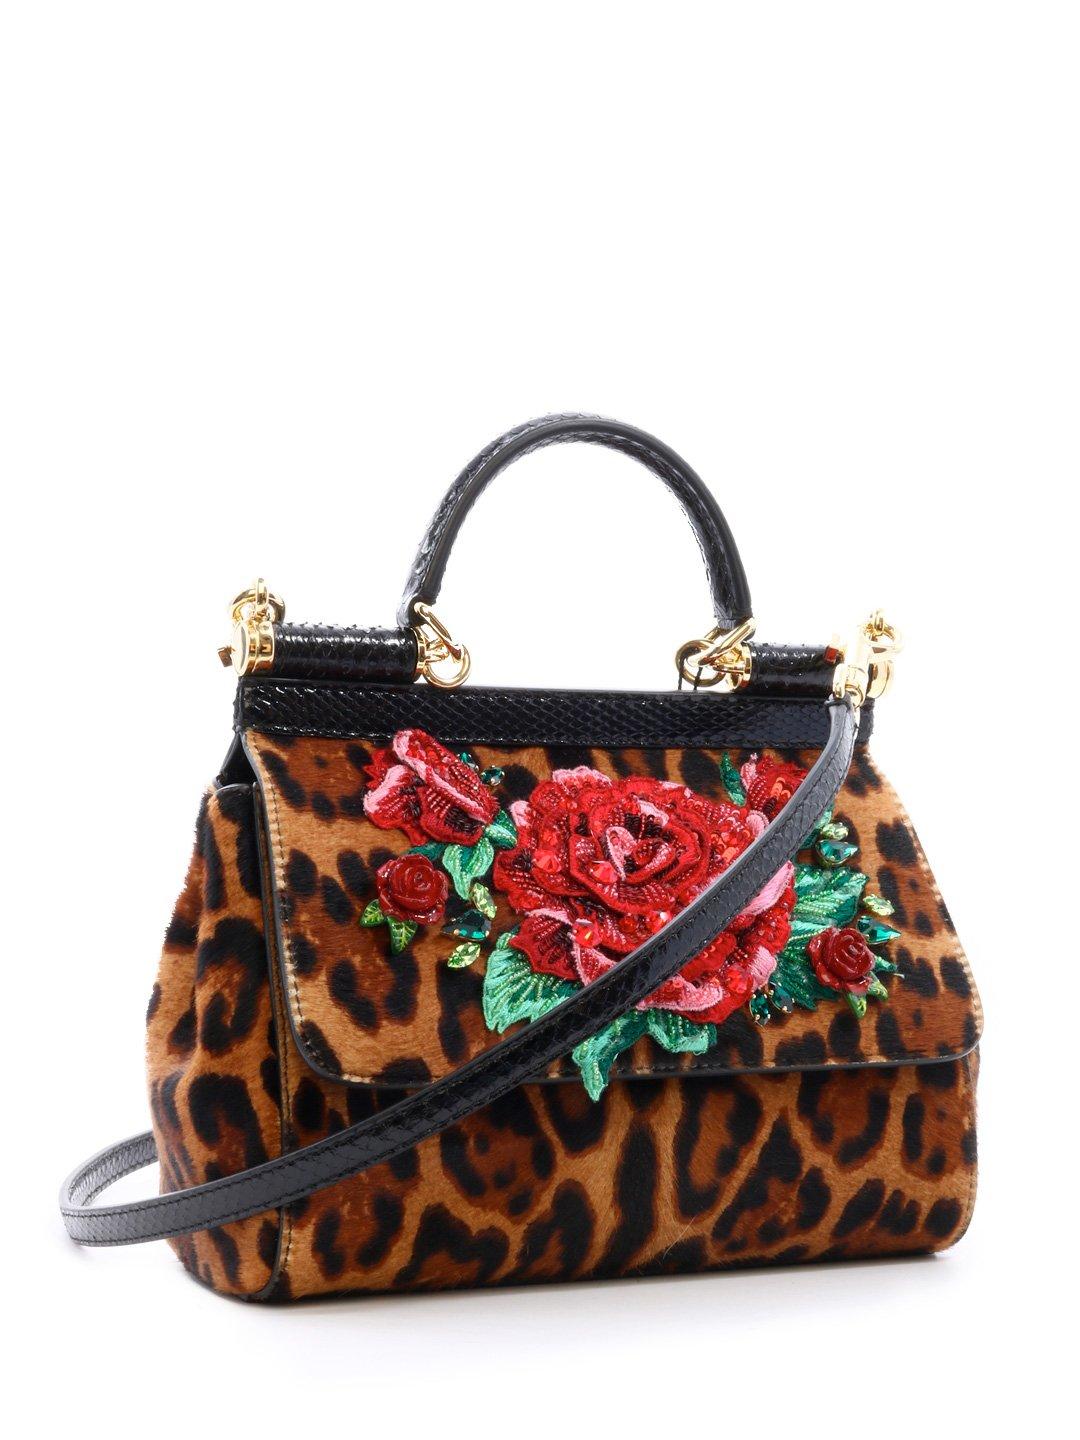 Dolce & Gabbana Rose Embroidered Leopard Print Tote Bag in Red - Lyst